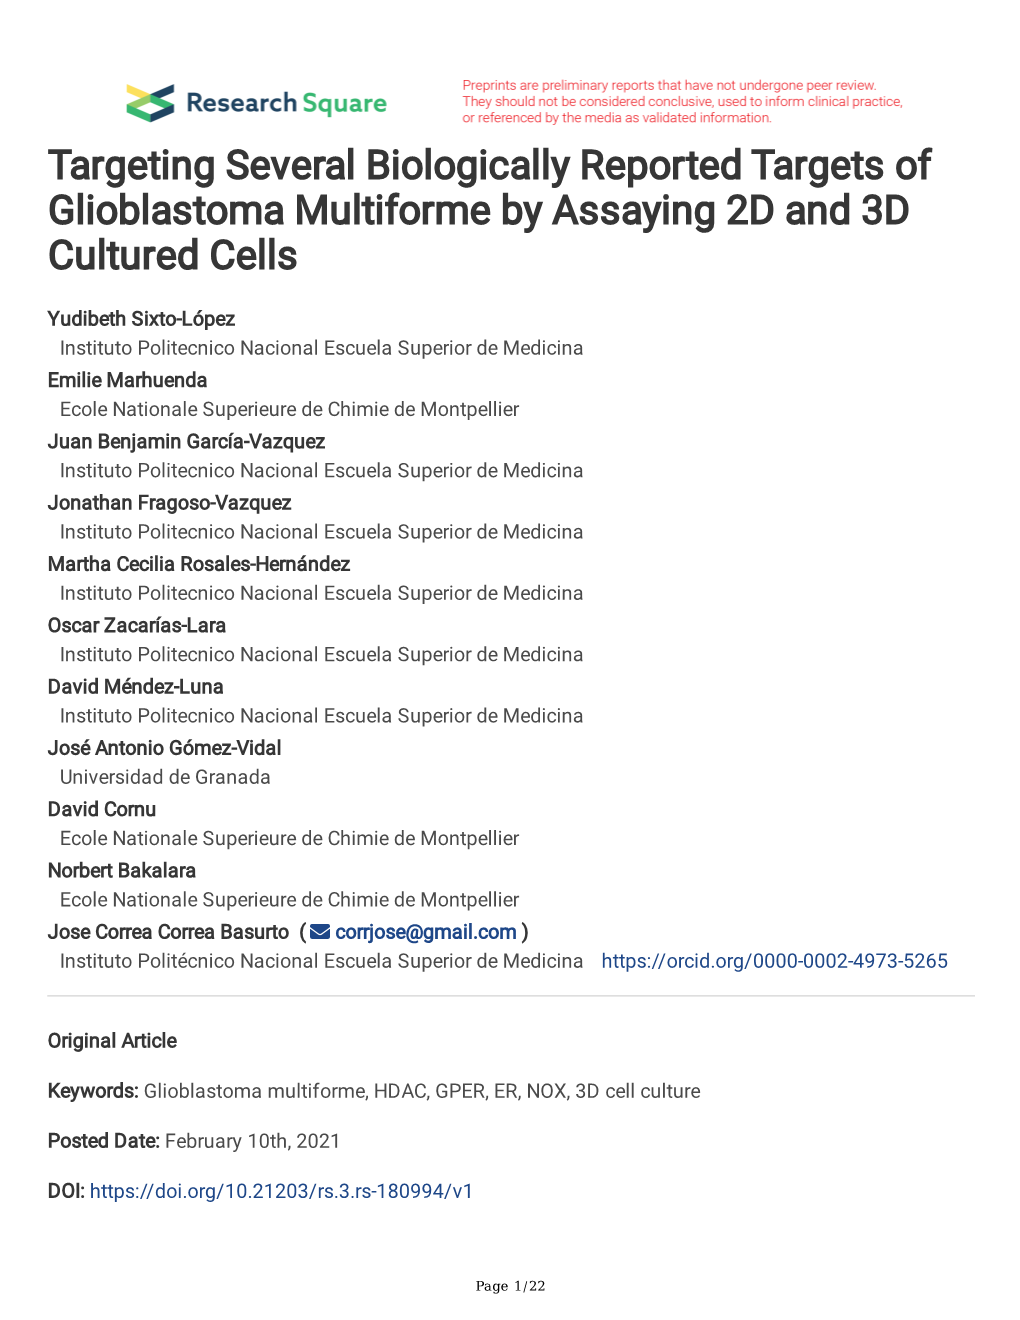 Targeting Several Biologically Reported Targets of Glioblastoma Multiforme by Assaying 2D and 3D Cultured Cells